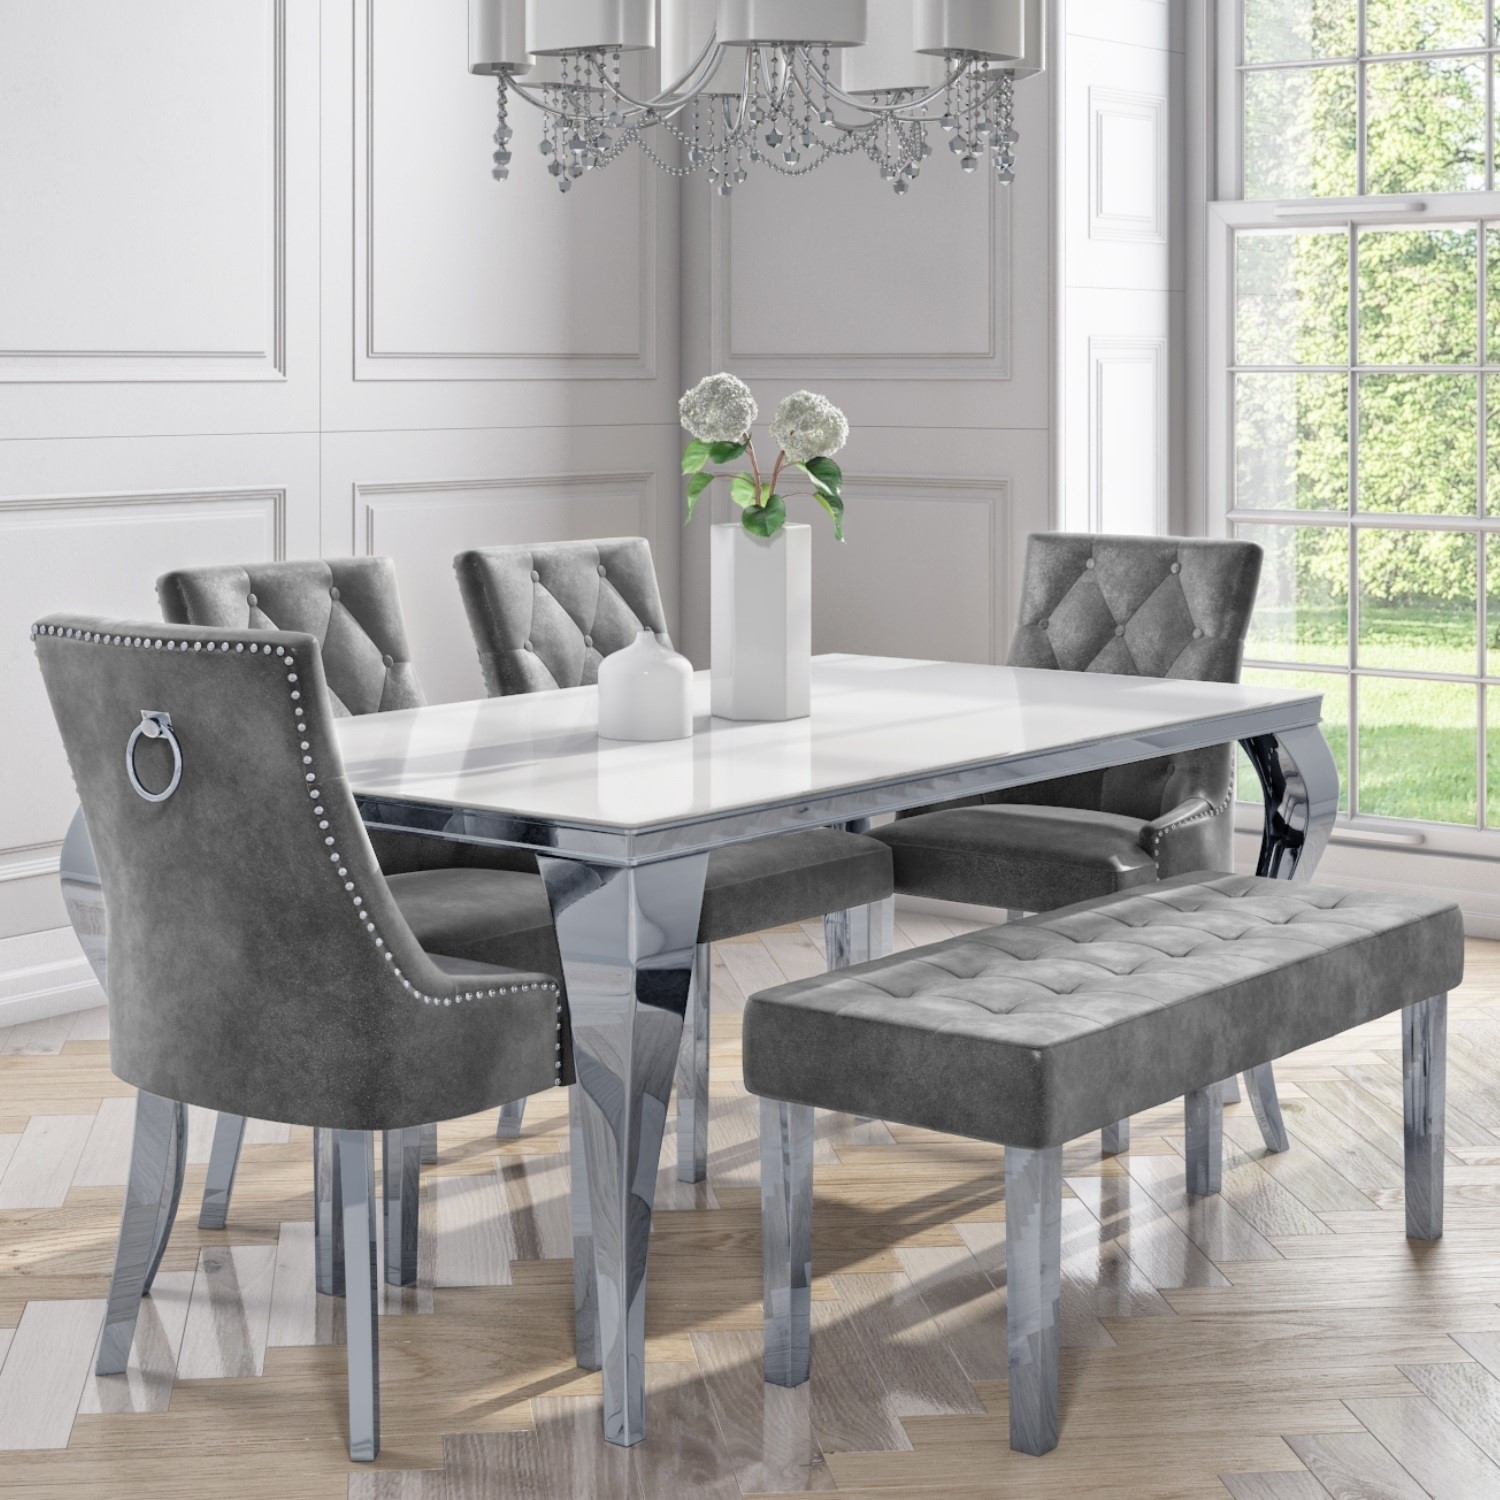 6 Seater Dining Set With White Table 4 Grey Velvet Chairs And 1